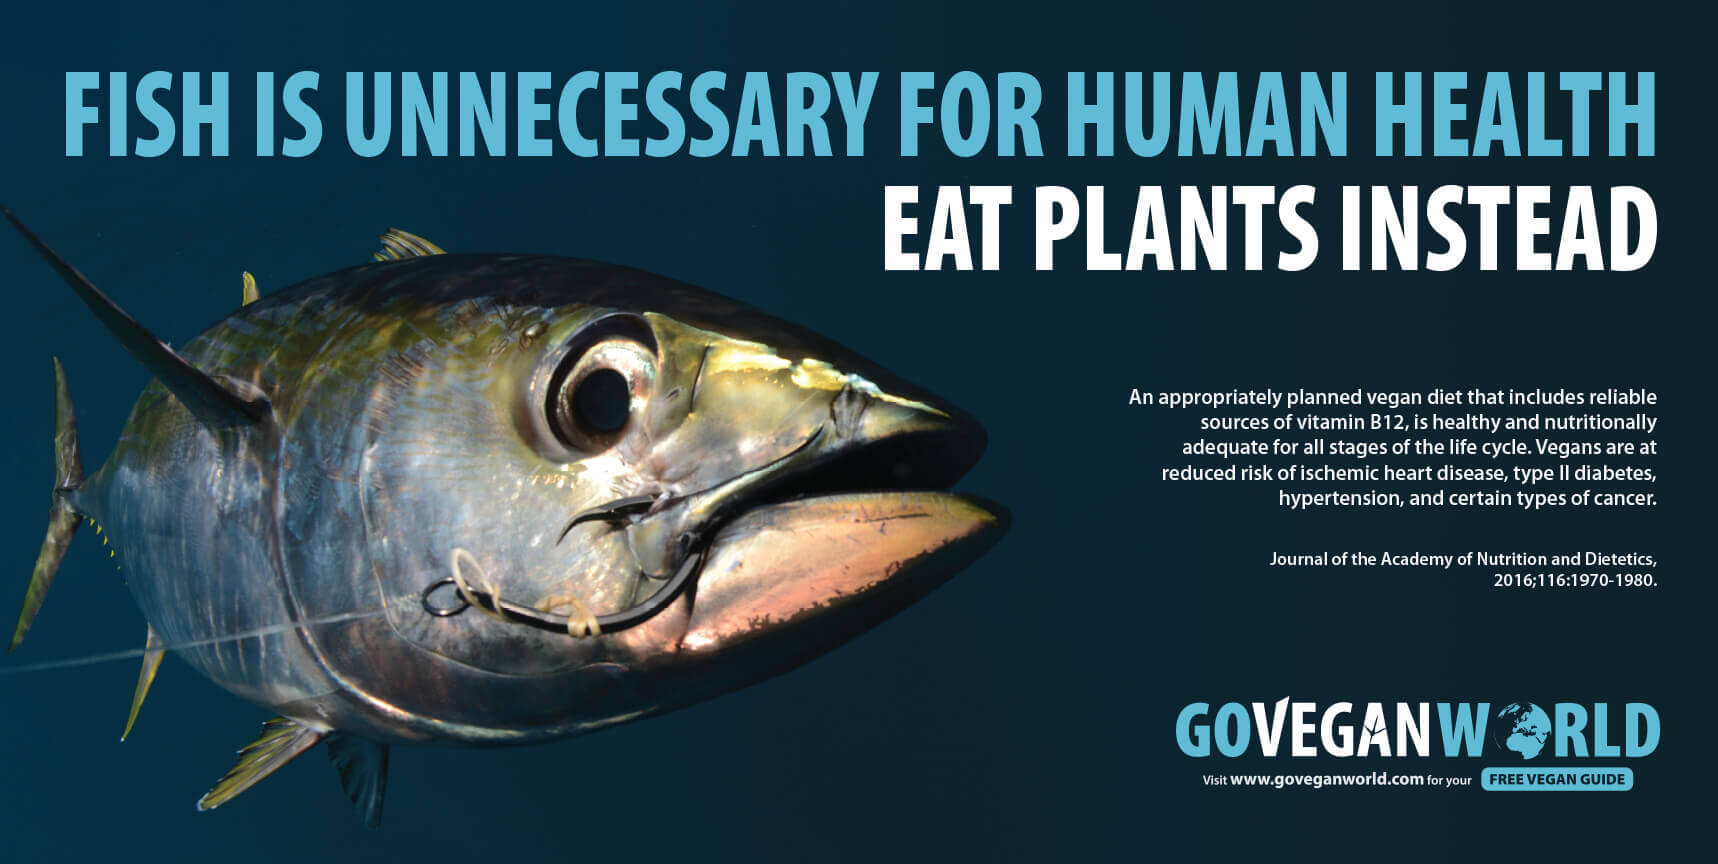 Fish is unnecessary for human health - eat plants instead